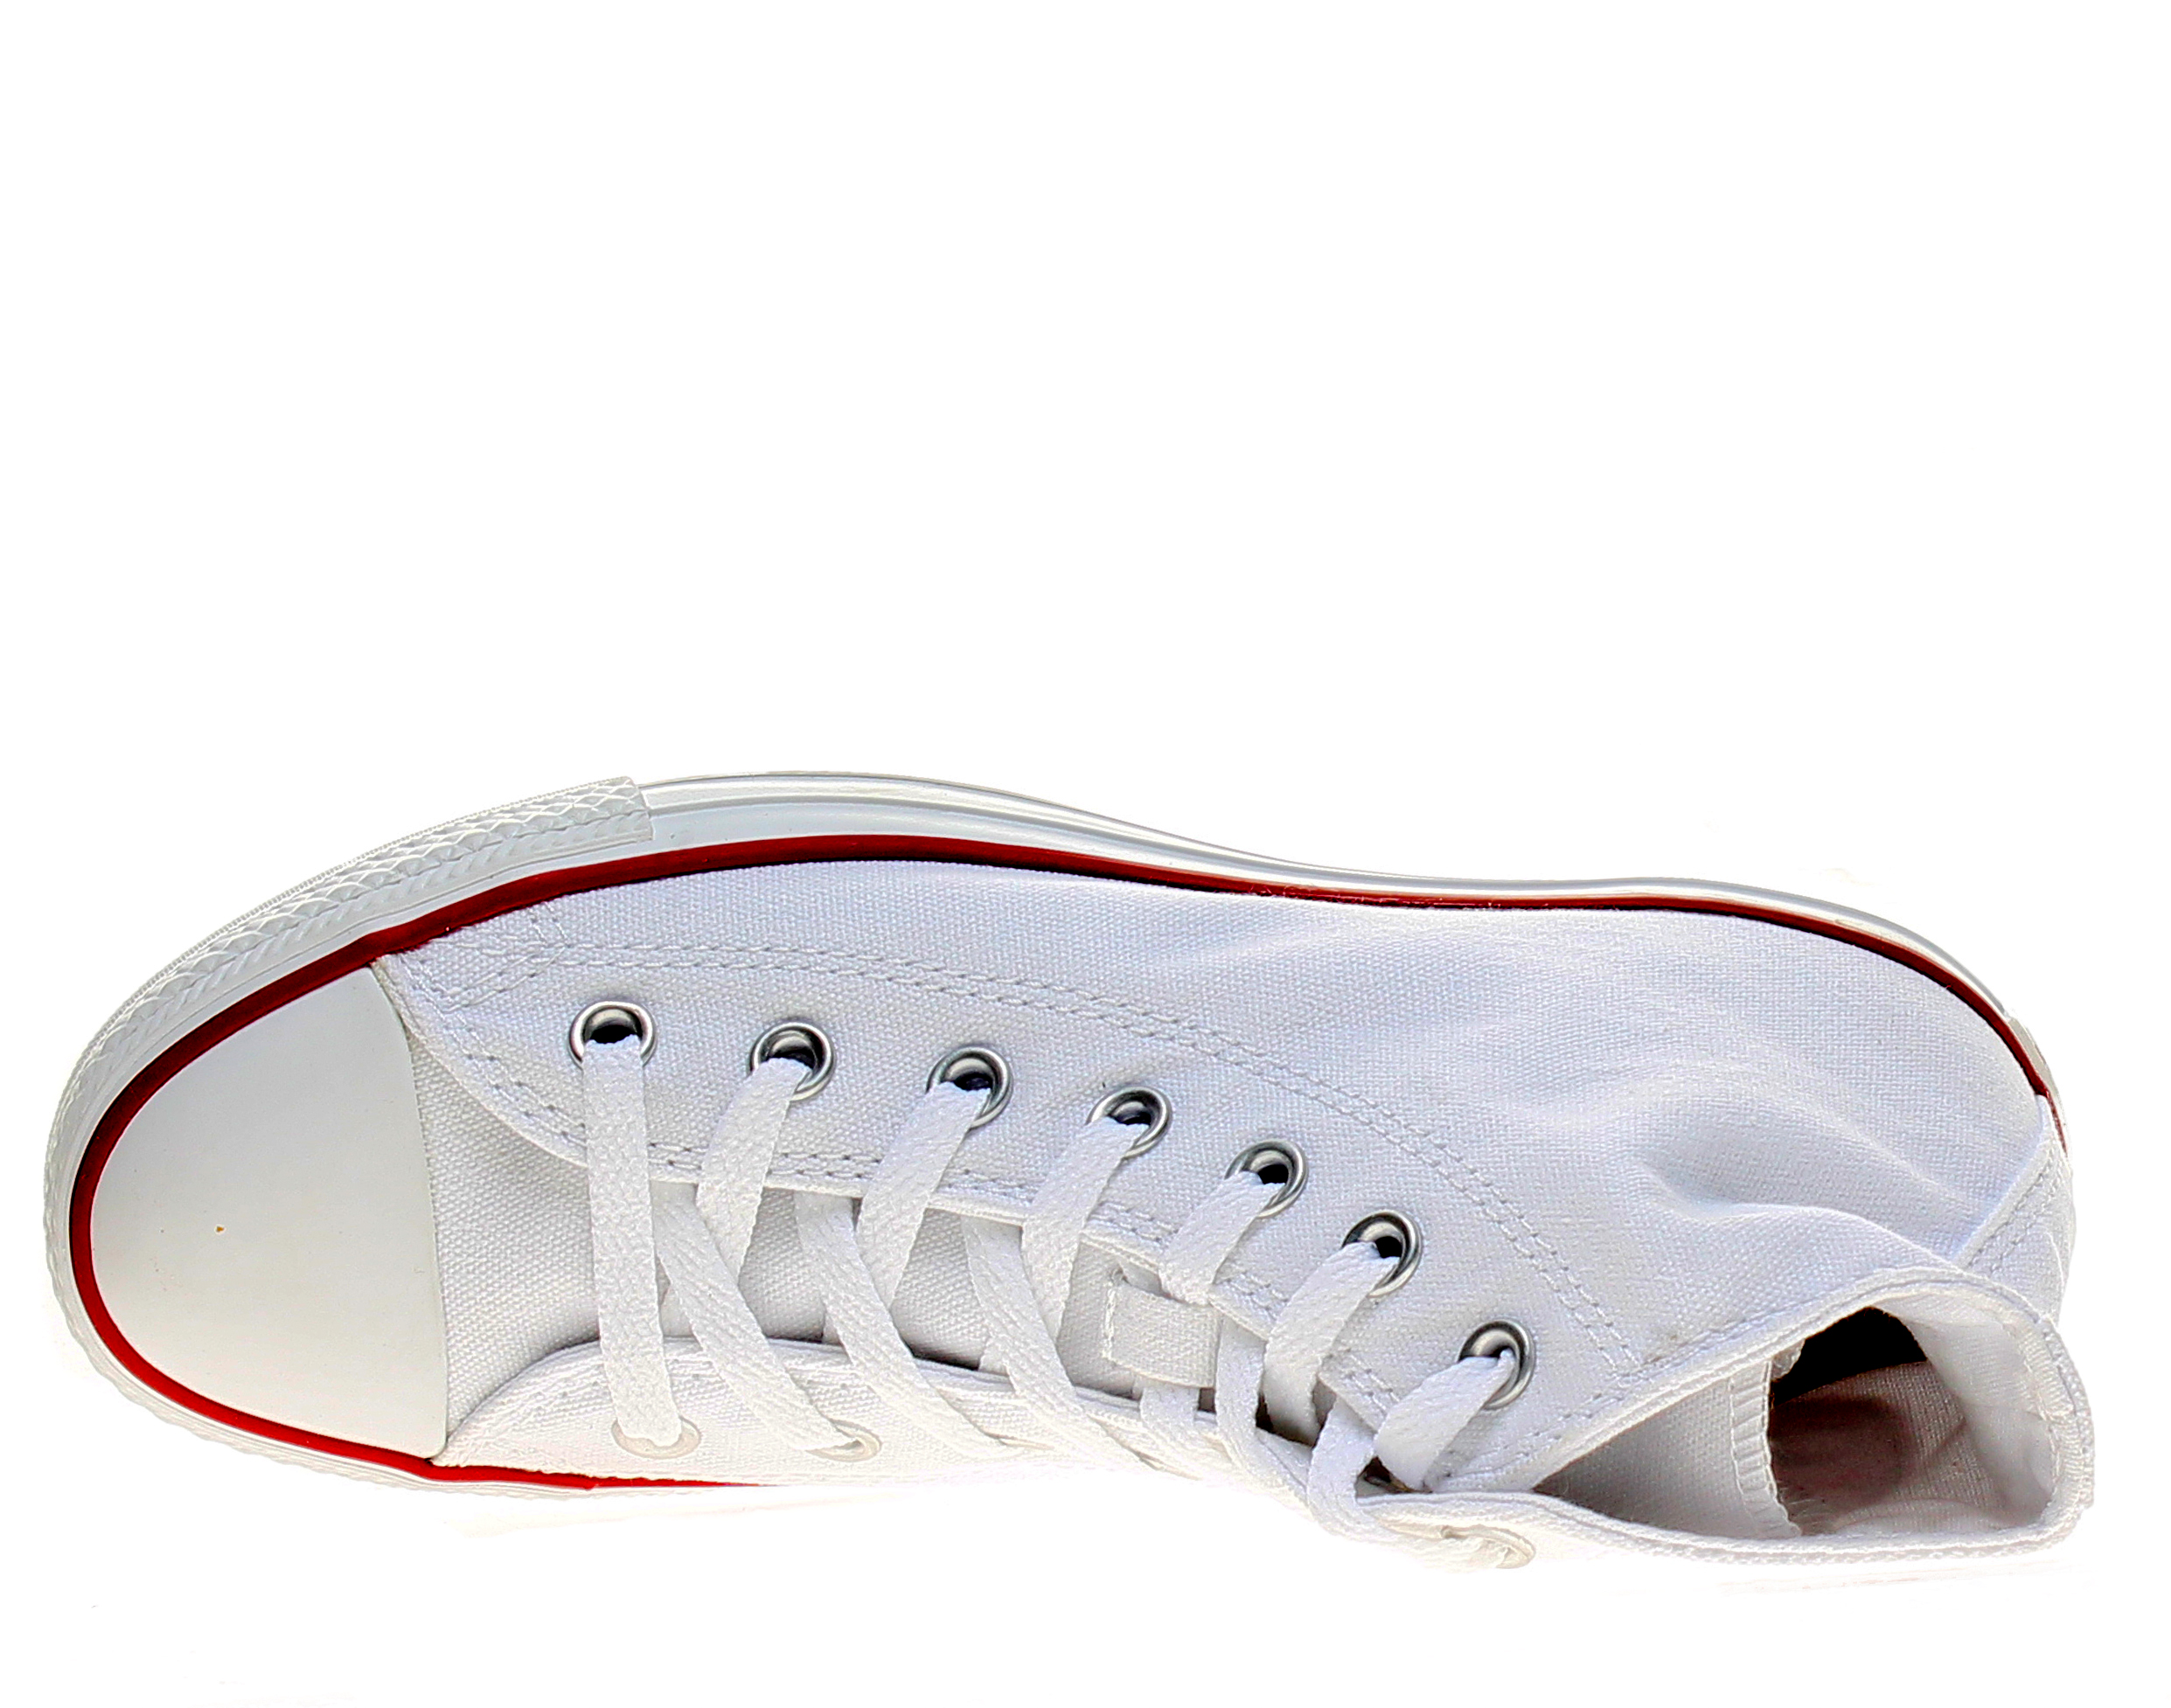 Converse Chuck Taylor All Star Hi Sneakers White - image 4 of 6